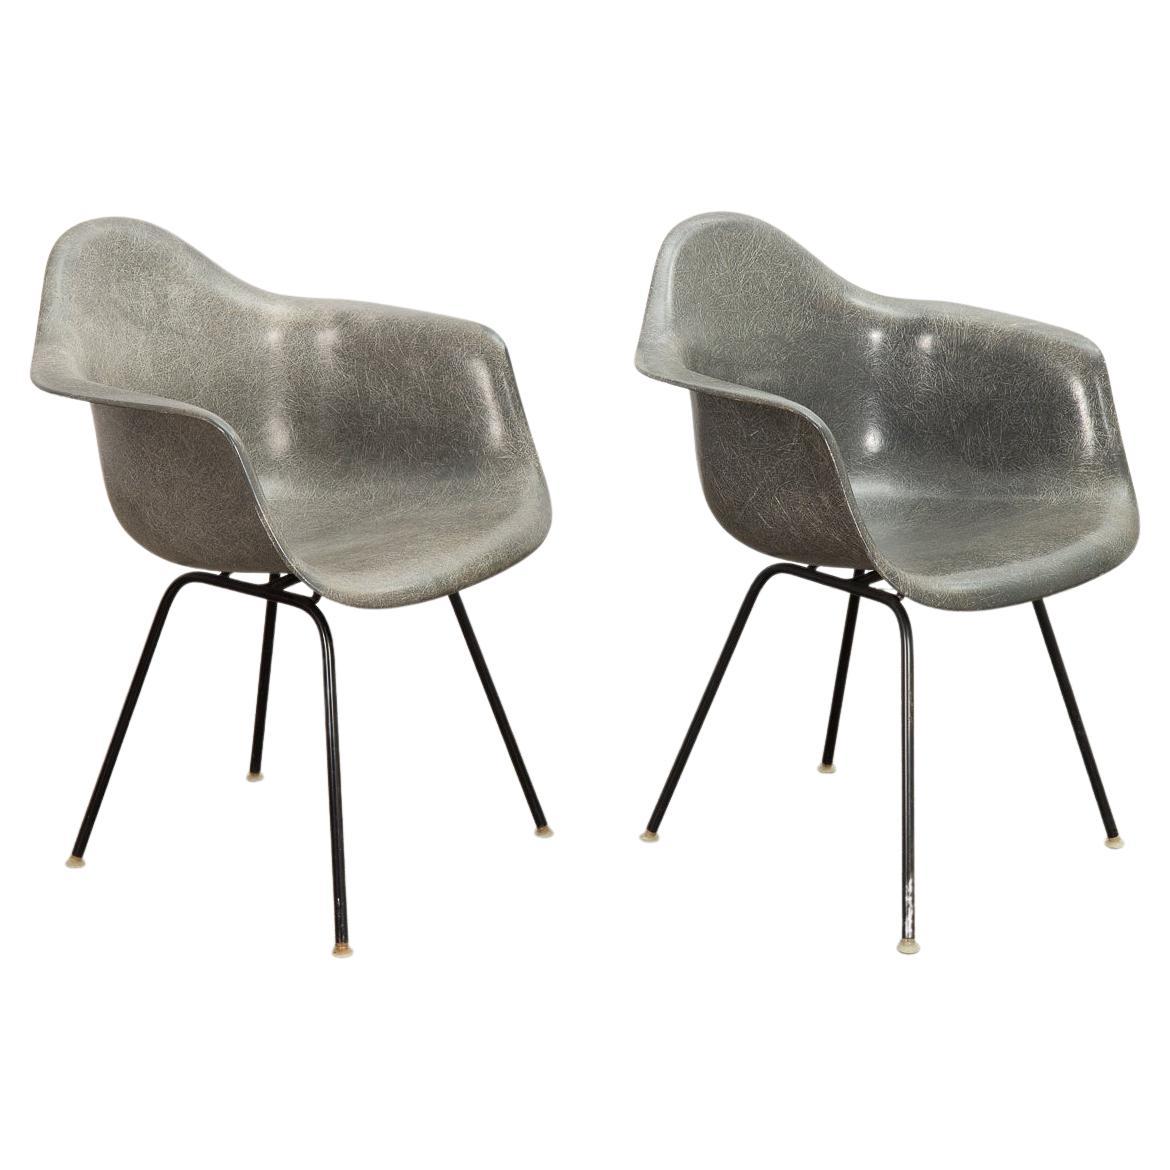 Pair of Eames Elephant Hide Armchairs